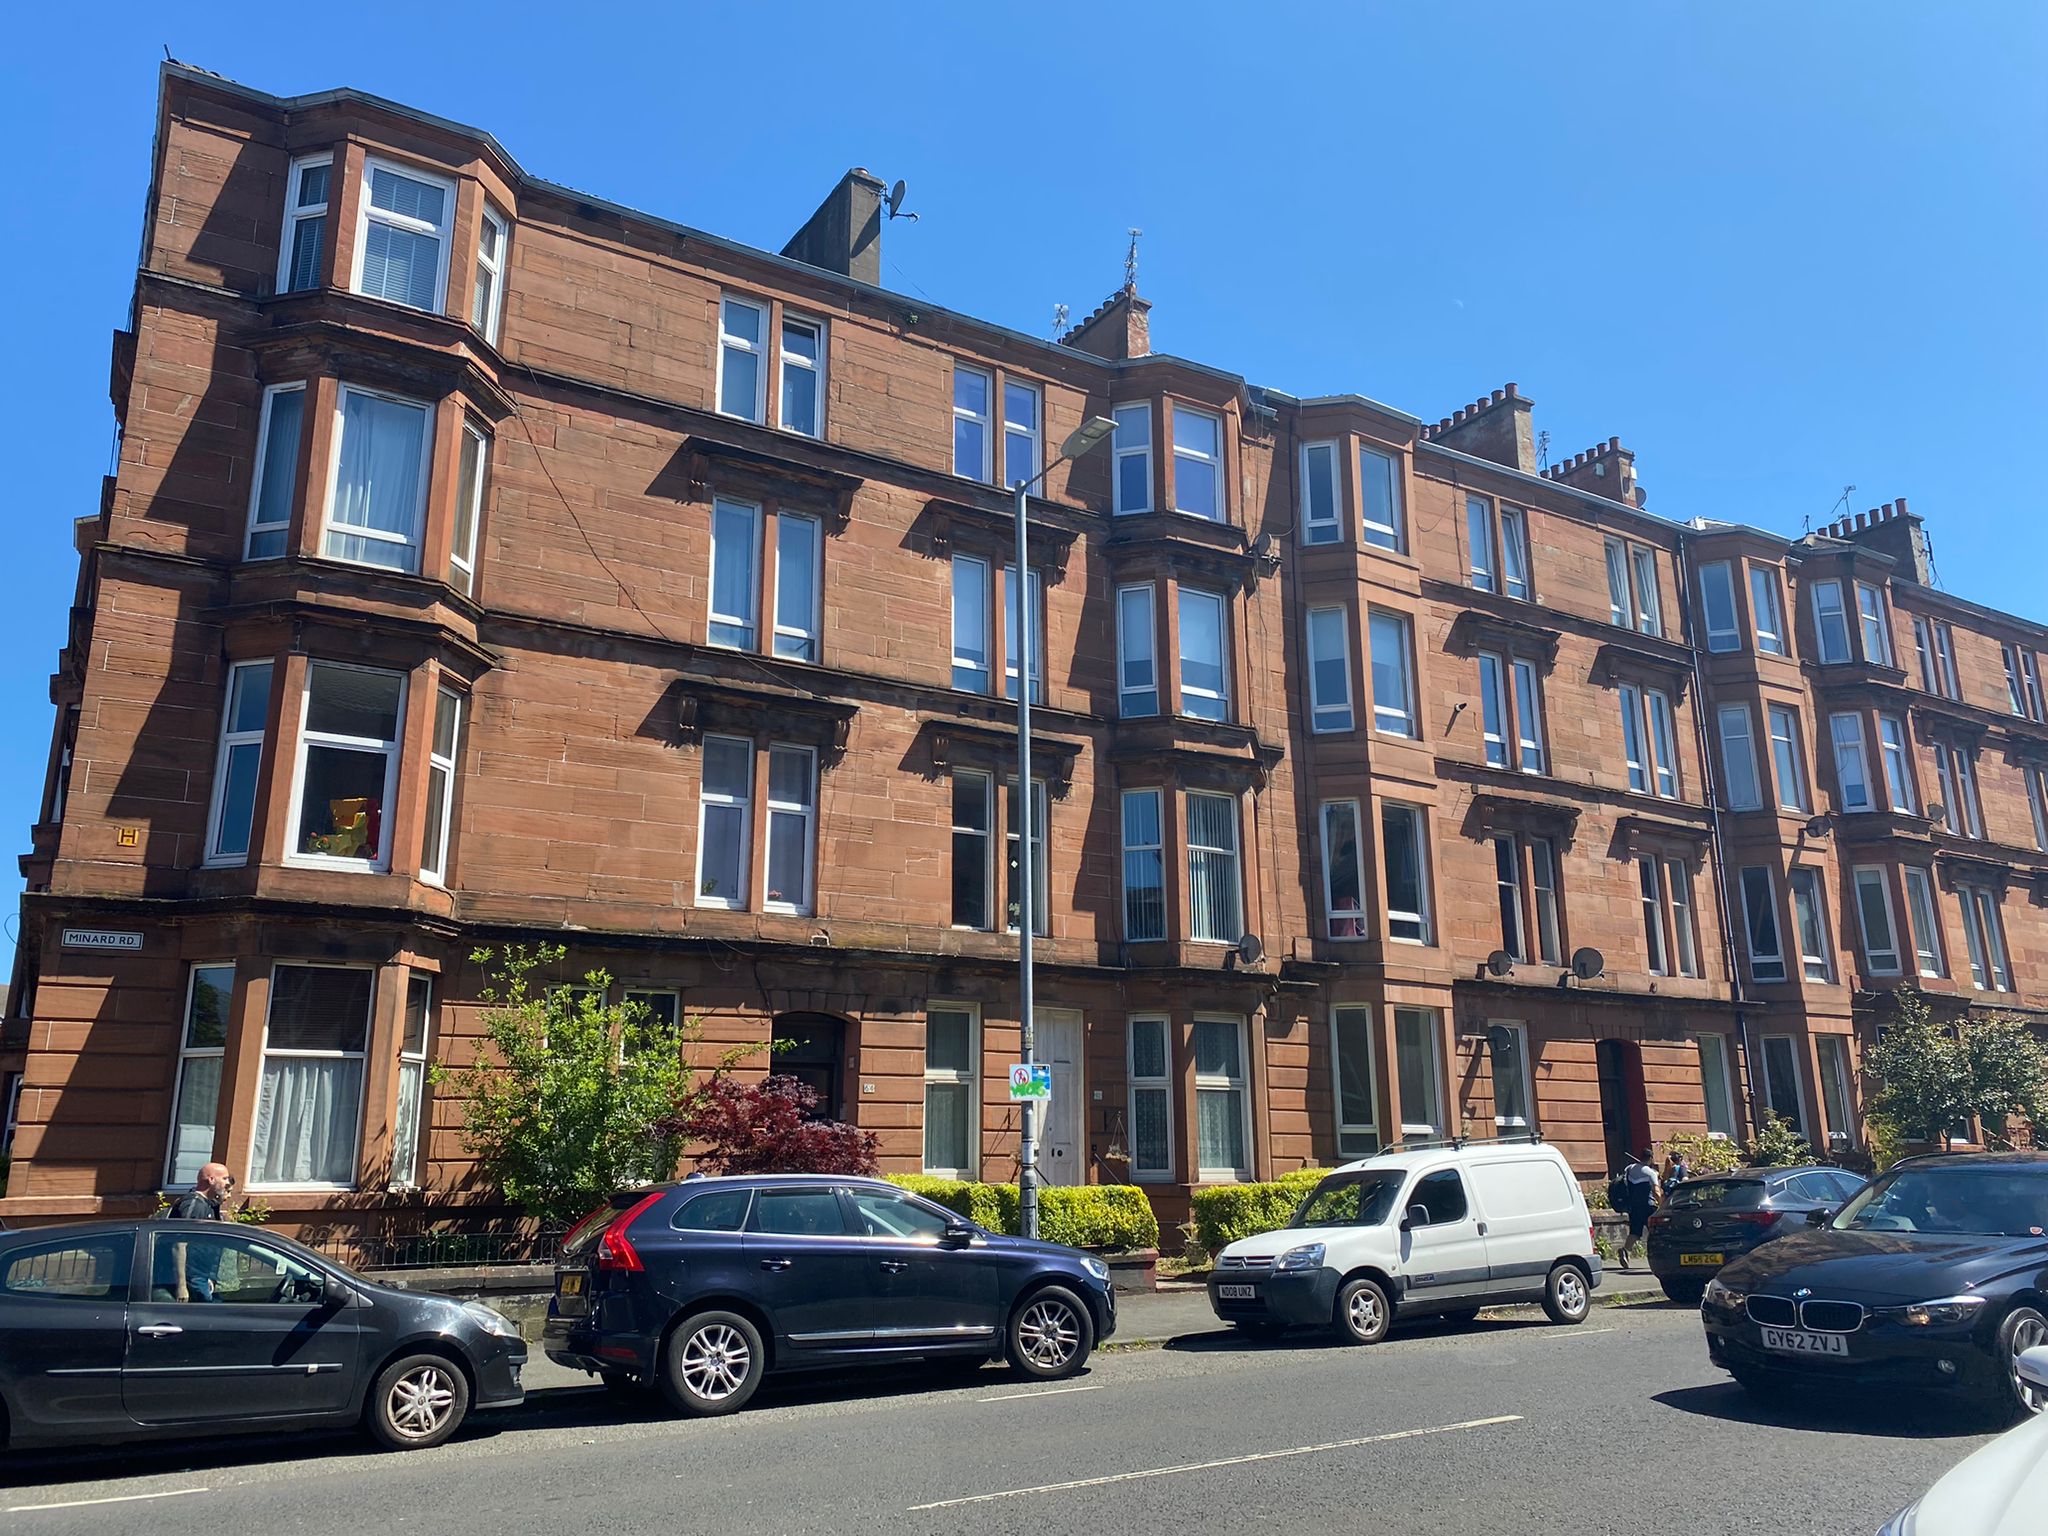 Glasgow moves to regulate short-term lets